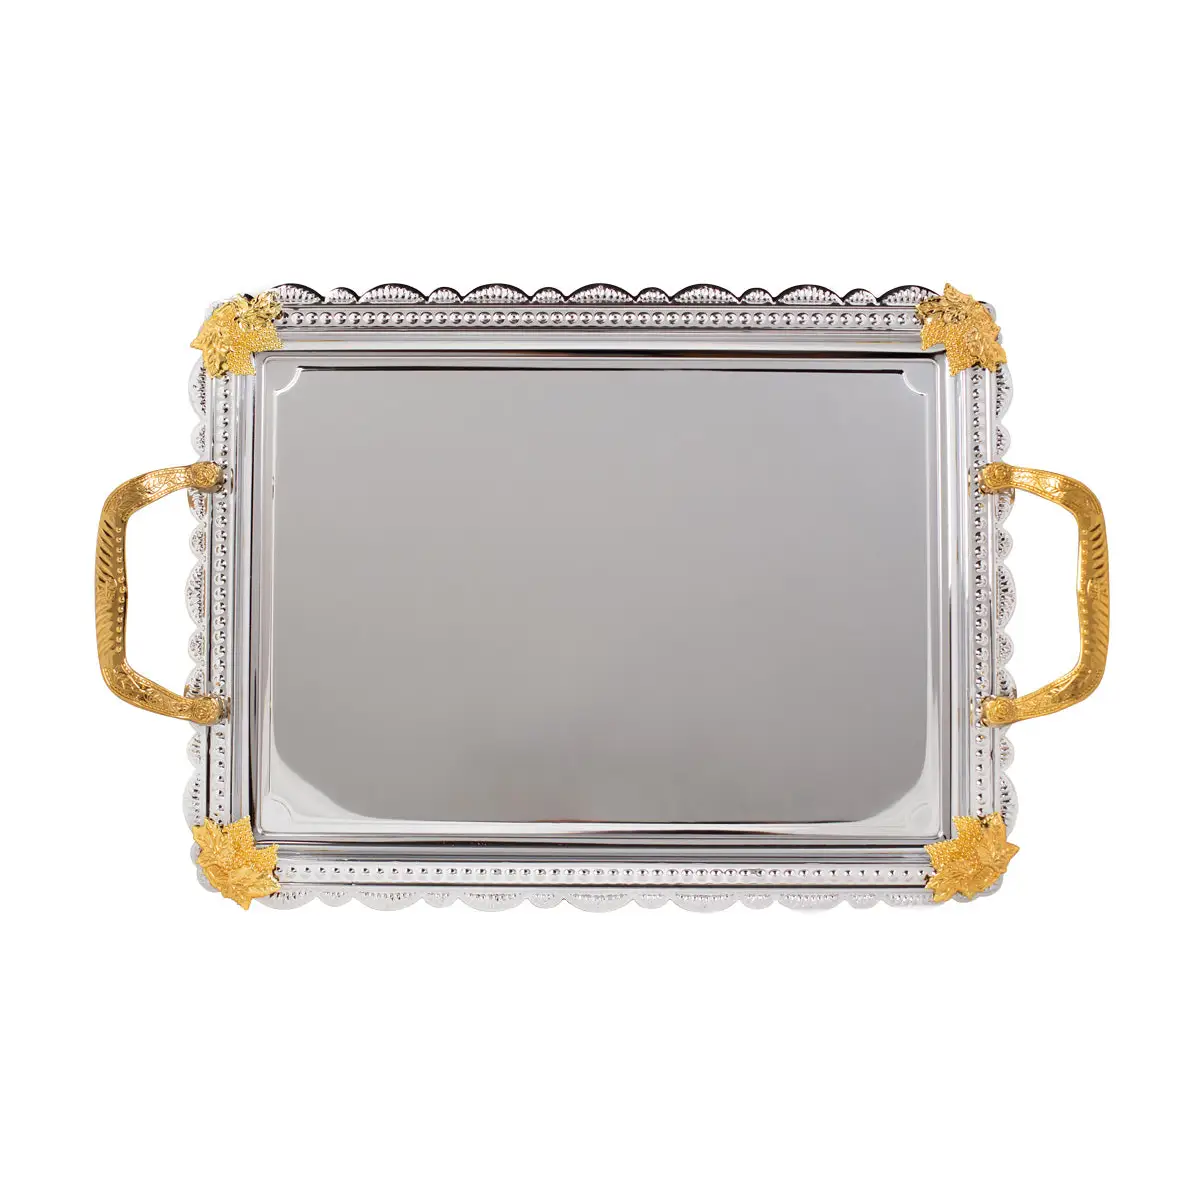 CHROME PLATED IRON RECT TRAY WITH GOLD HANDLE - TRAY